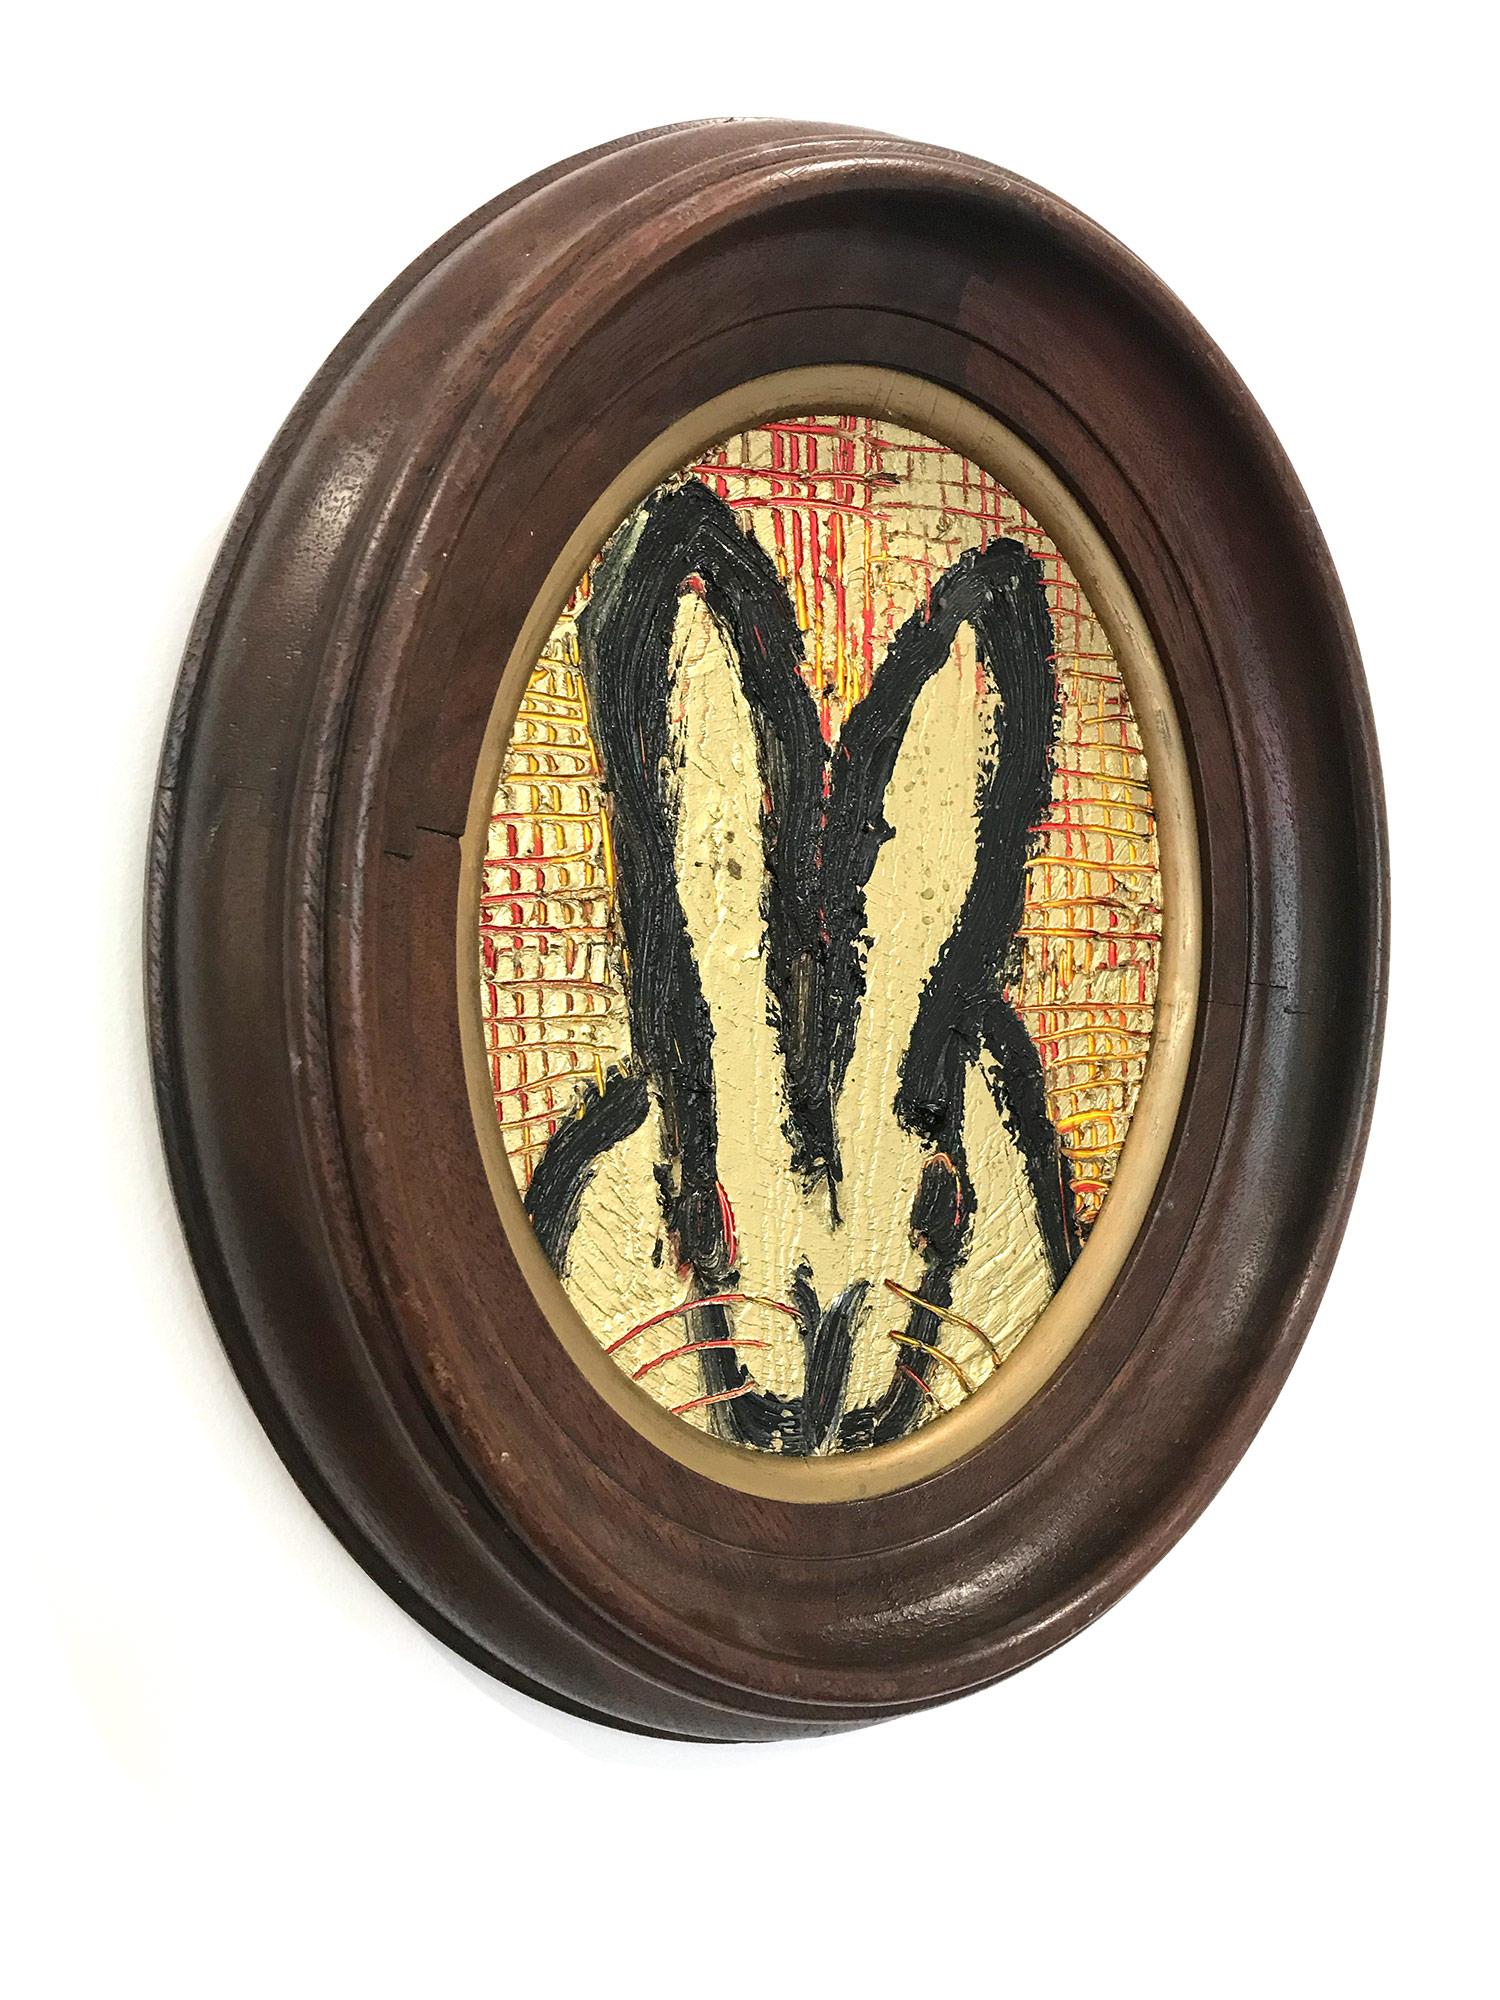 A wonderful composition of one of Slonem's most iconic subjects, Bunnies. This piece depicts a gestural figure of a black bunny on a gold background with thick use of oil paint and red accents. It is housed in a wonderful oval antique 19th Century